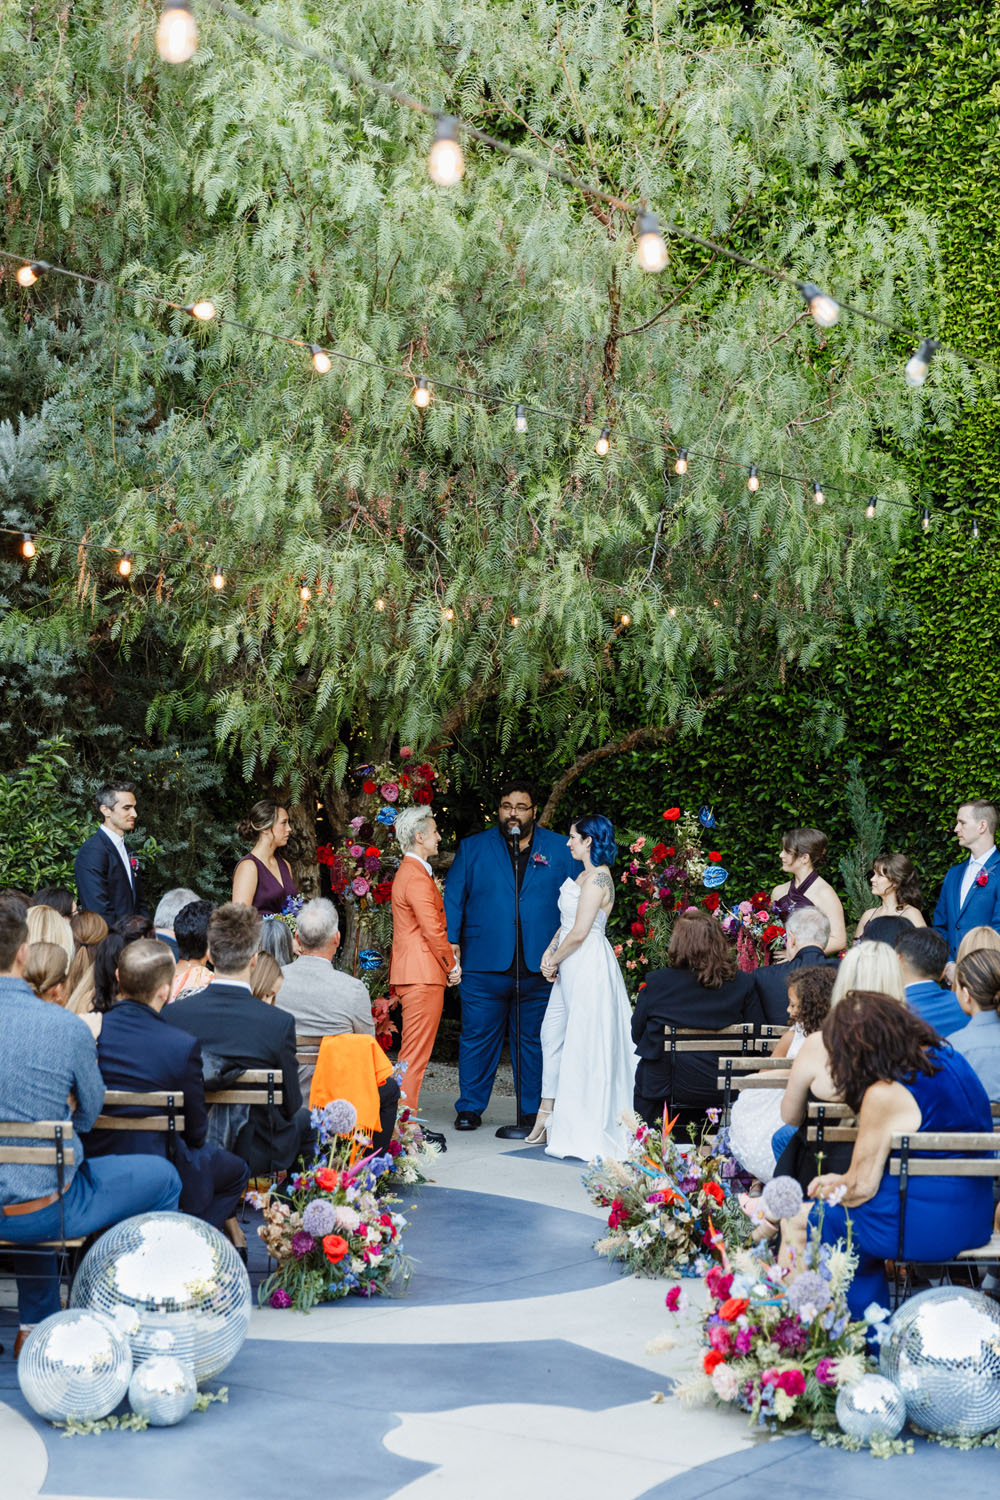 Disco balls and jewel tones filled this upbeat Fig House wedding